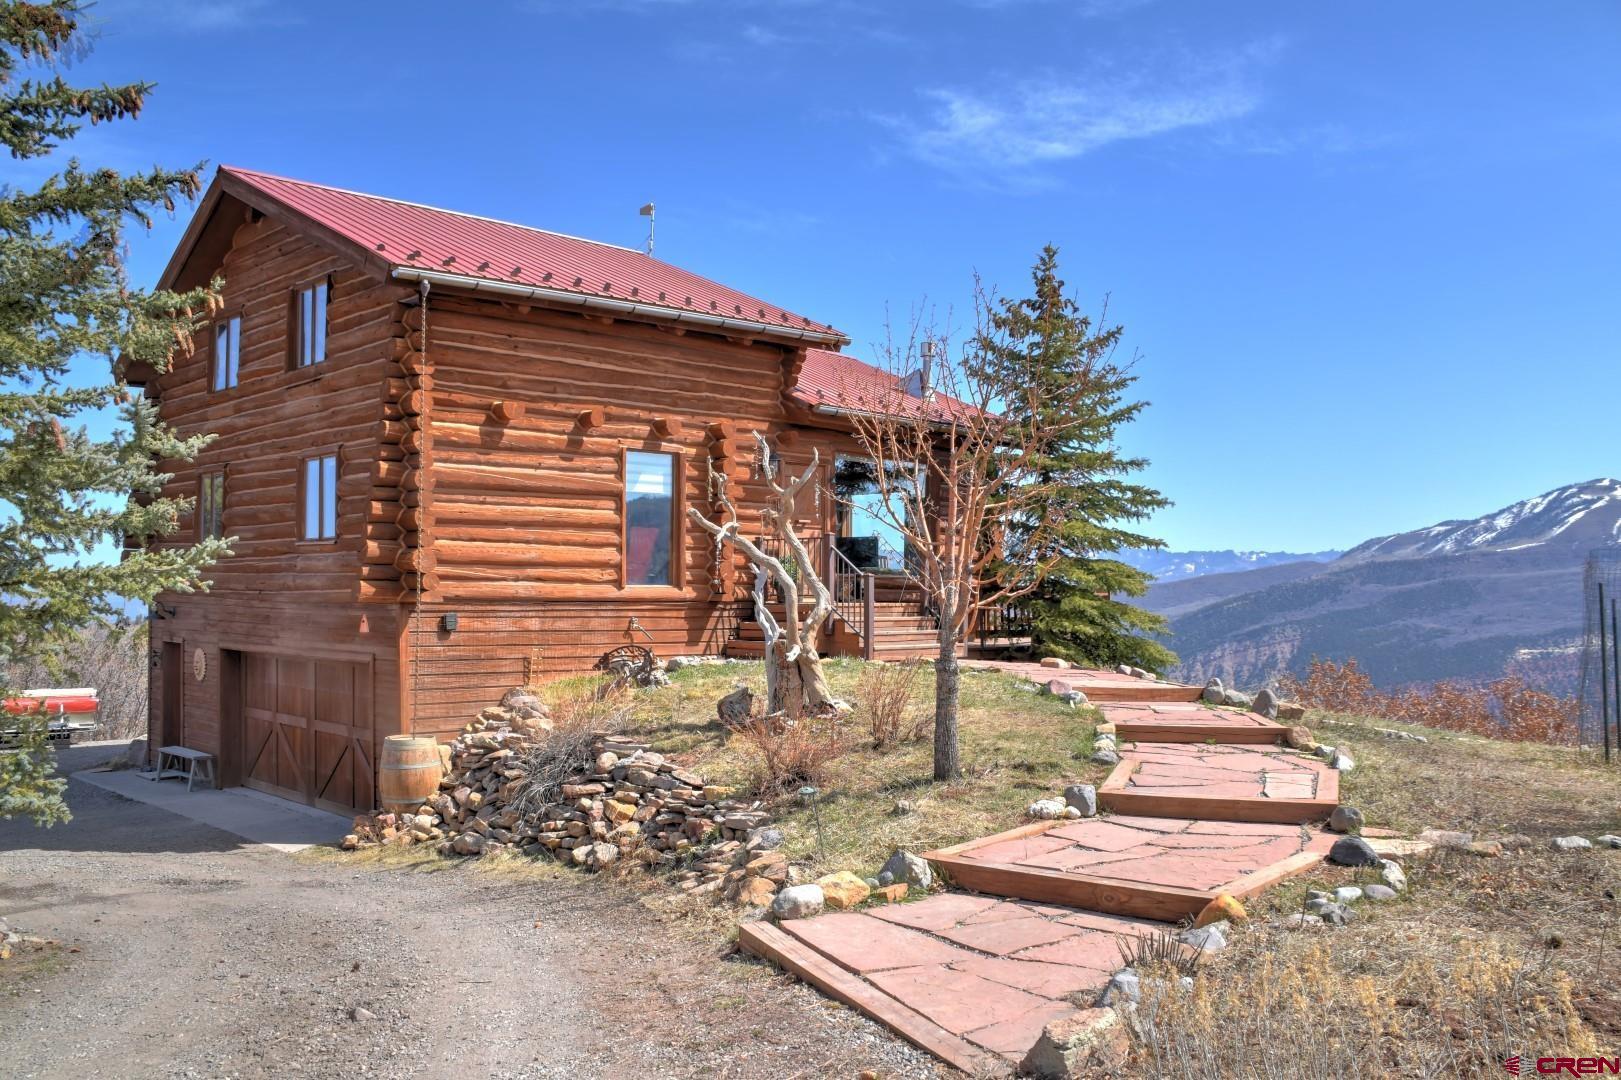 Rare opportunity Log home sitting on the escarpment. Unbeatable views of the Cimarrons, San Juan Range and Mt. Sneffles. 44 Fawn Lane features a grand great room looking directly into the Cimarrons with a Vermont Castings Propane Stove. Eat in Kitchen, along with a walk in pantry with a open concept dining room.  Ideal for both formal and informal entertaining. Just down the hall from the kitchen there is a main floor bedroom along with a full bathroom. Upstairs you will find a sleeping loft with a fully renovated bathroom featuring 360 degree views all the way to the grand mesa.  Lower level Master suite features large bathroom, private entrance and a large deck.  Large 2 Car Garage where you will find a utility sink, washer and dryer, workbench. With fine Craftsmanship, unbeatable views, 3 private sleeping quarters, high speed internet installed, exterior shed installed and included. This is the one! Ready for a full time residence or a mountain getaway, just 15 minutes from Ridgway. Seller will be taking offers until Friday the 22nd at 11:00 am.